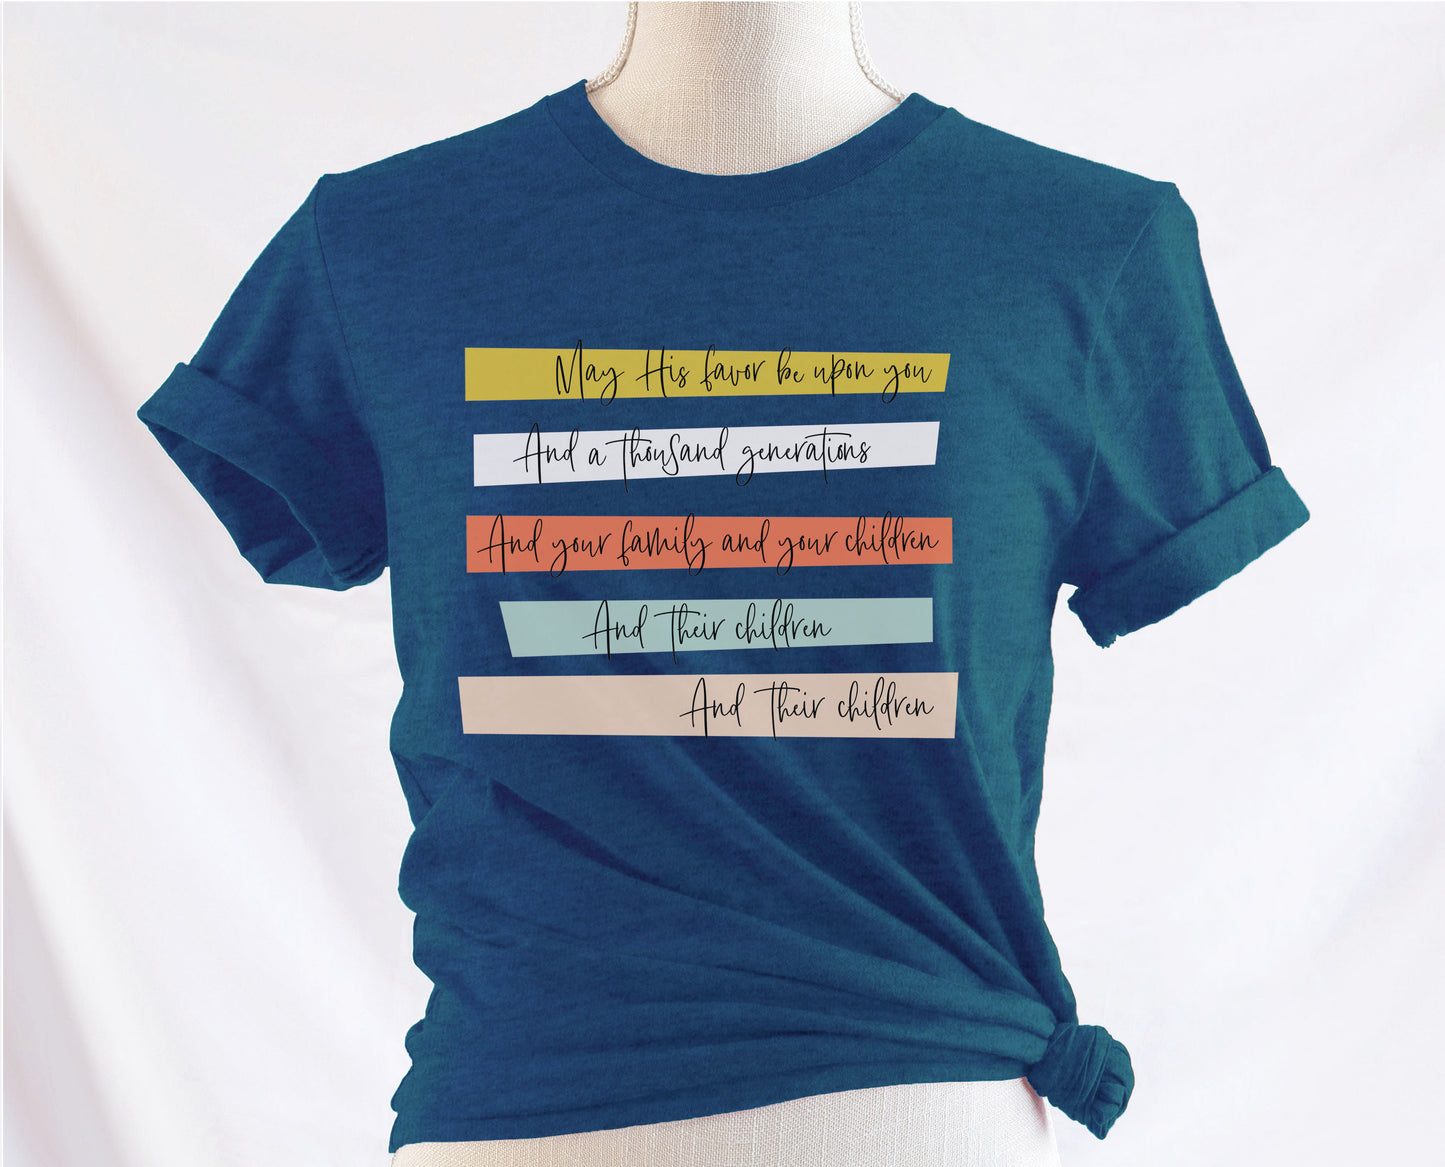 May His Favor Be Upon You and a thousand generations The Family and children Blessing Christian aesthetic 5 bars design printed on soft heather deep teal t-shirt for women